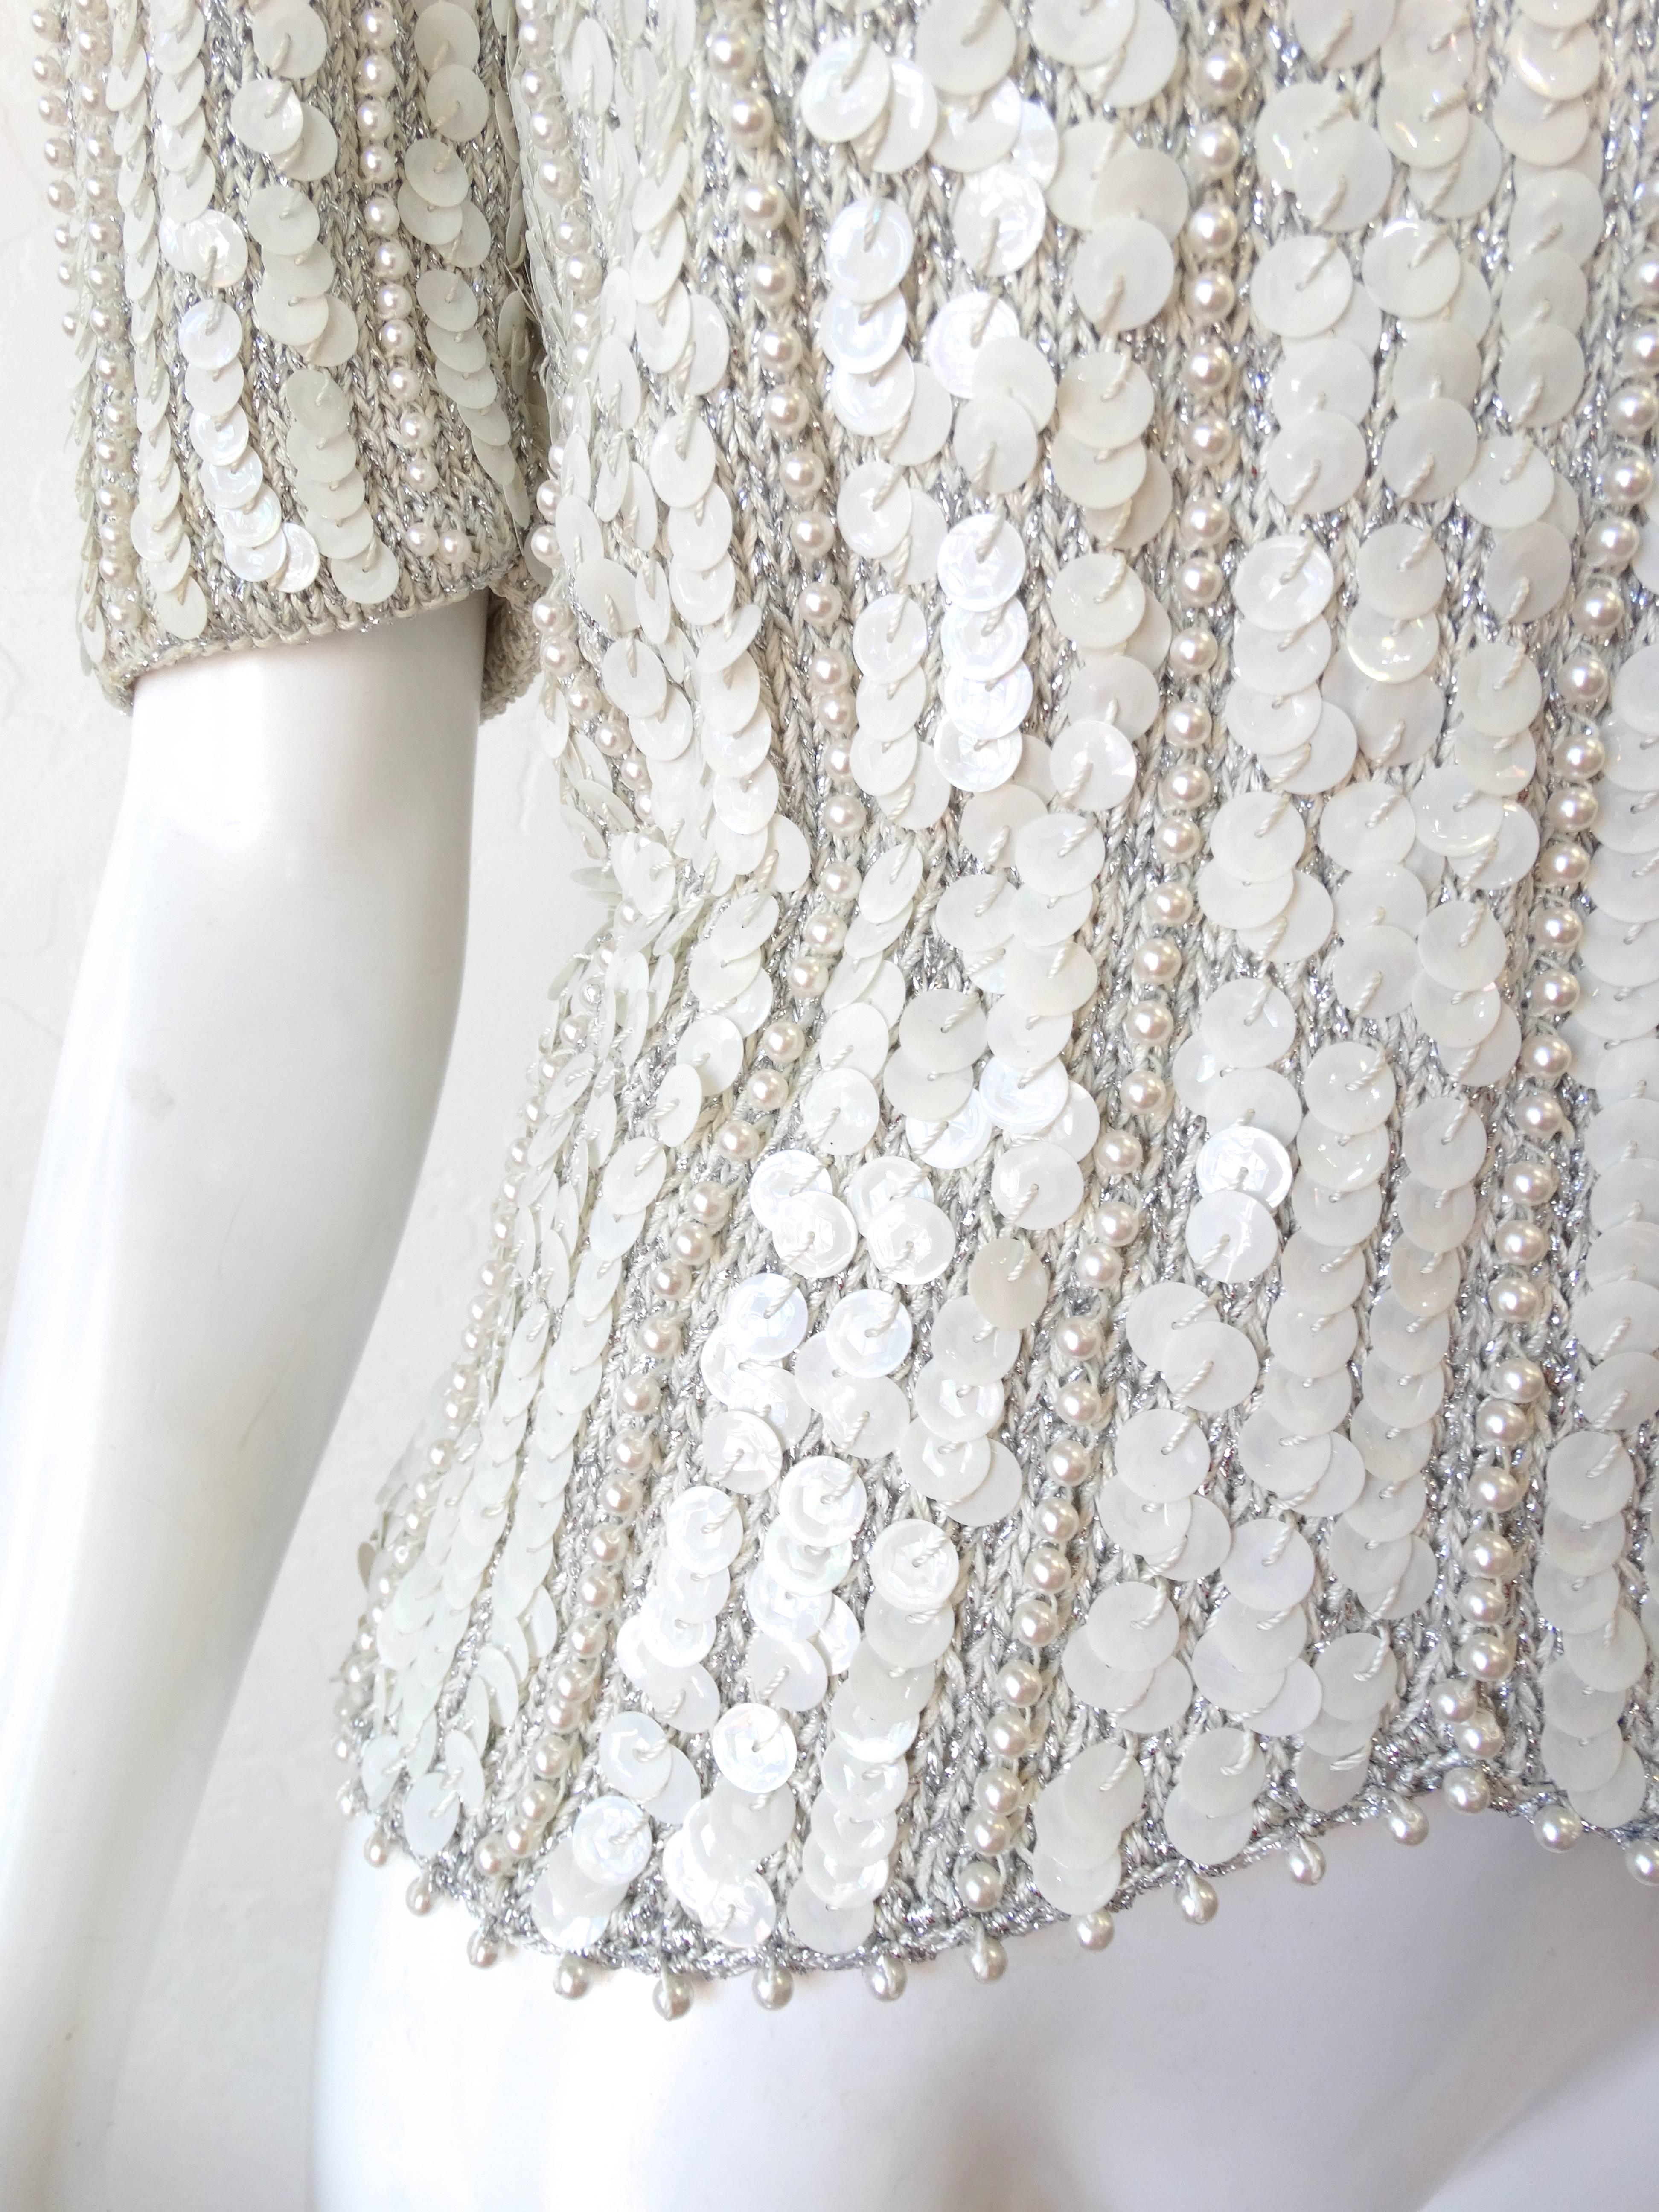 The perfect vintage meets glam sweater for your next evening out! Made of a white stretch knit fabric encrusted with stripes of large iridescent sequins and pearl beads. Strong shoulders, slightly padded-gives the illusion of an even smaller waist!